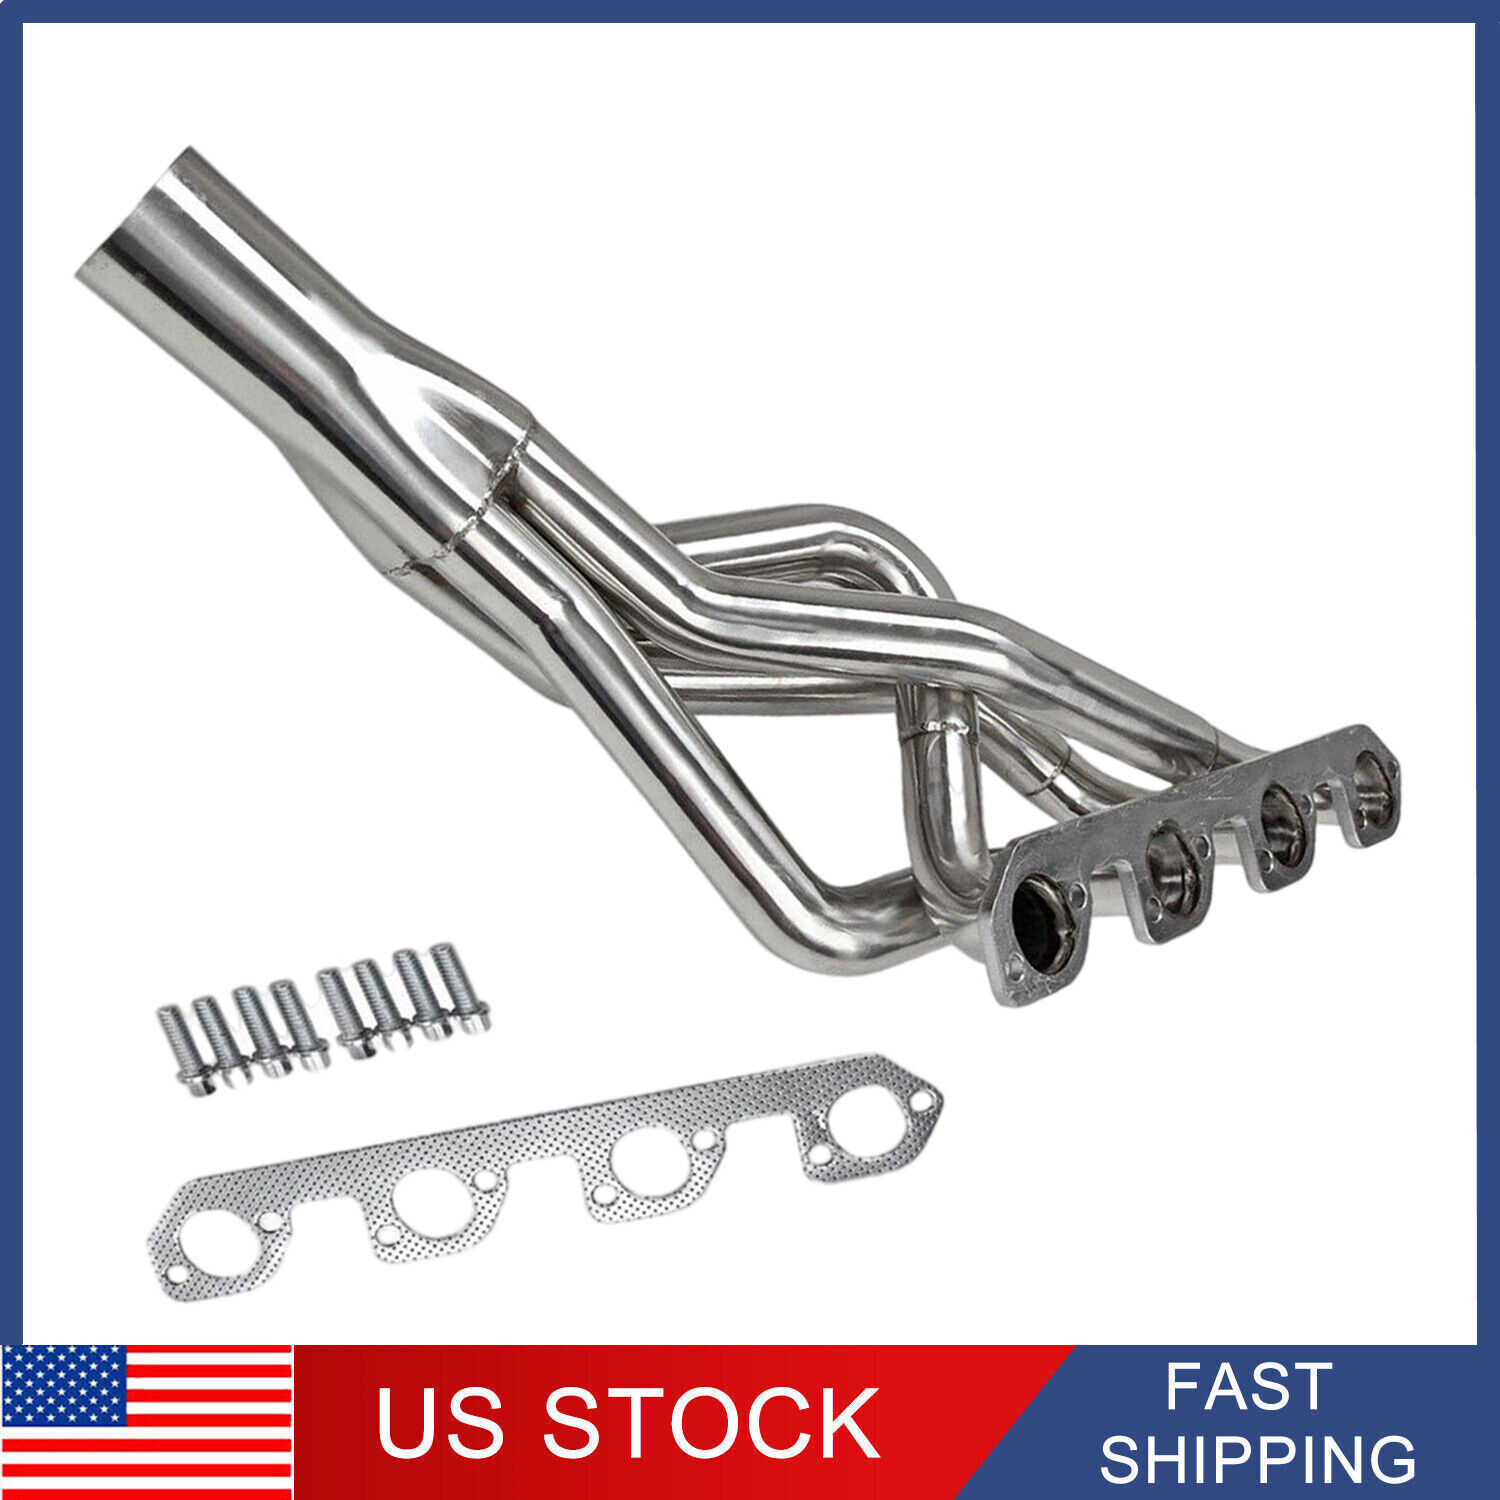 Stainless Steel Manifold Headers Fit 74-80 Ford Pinto 82-92 Ranger 2.3L Pro